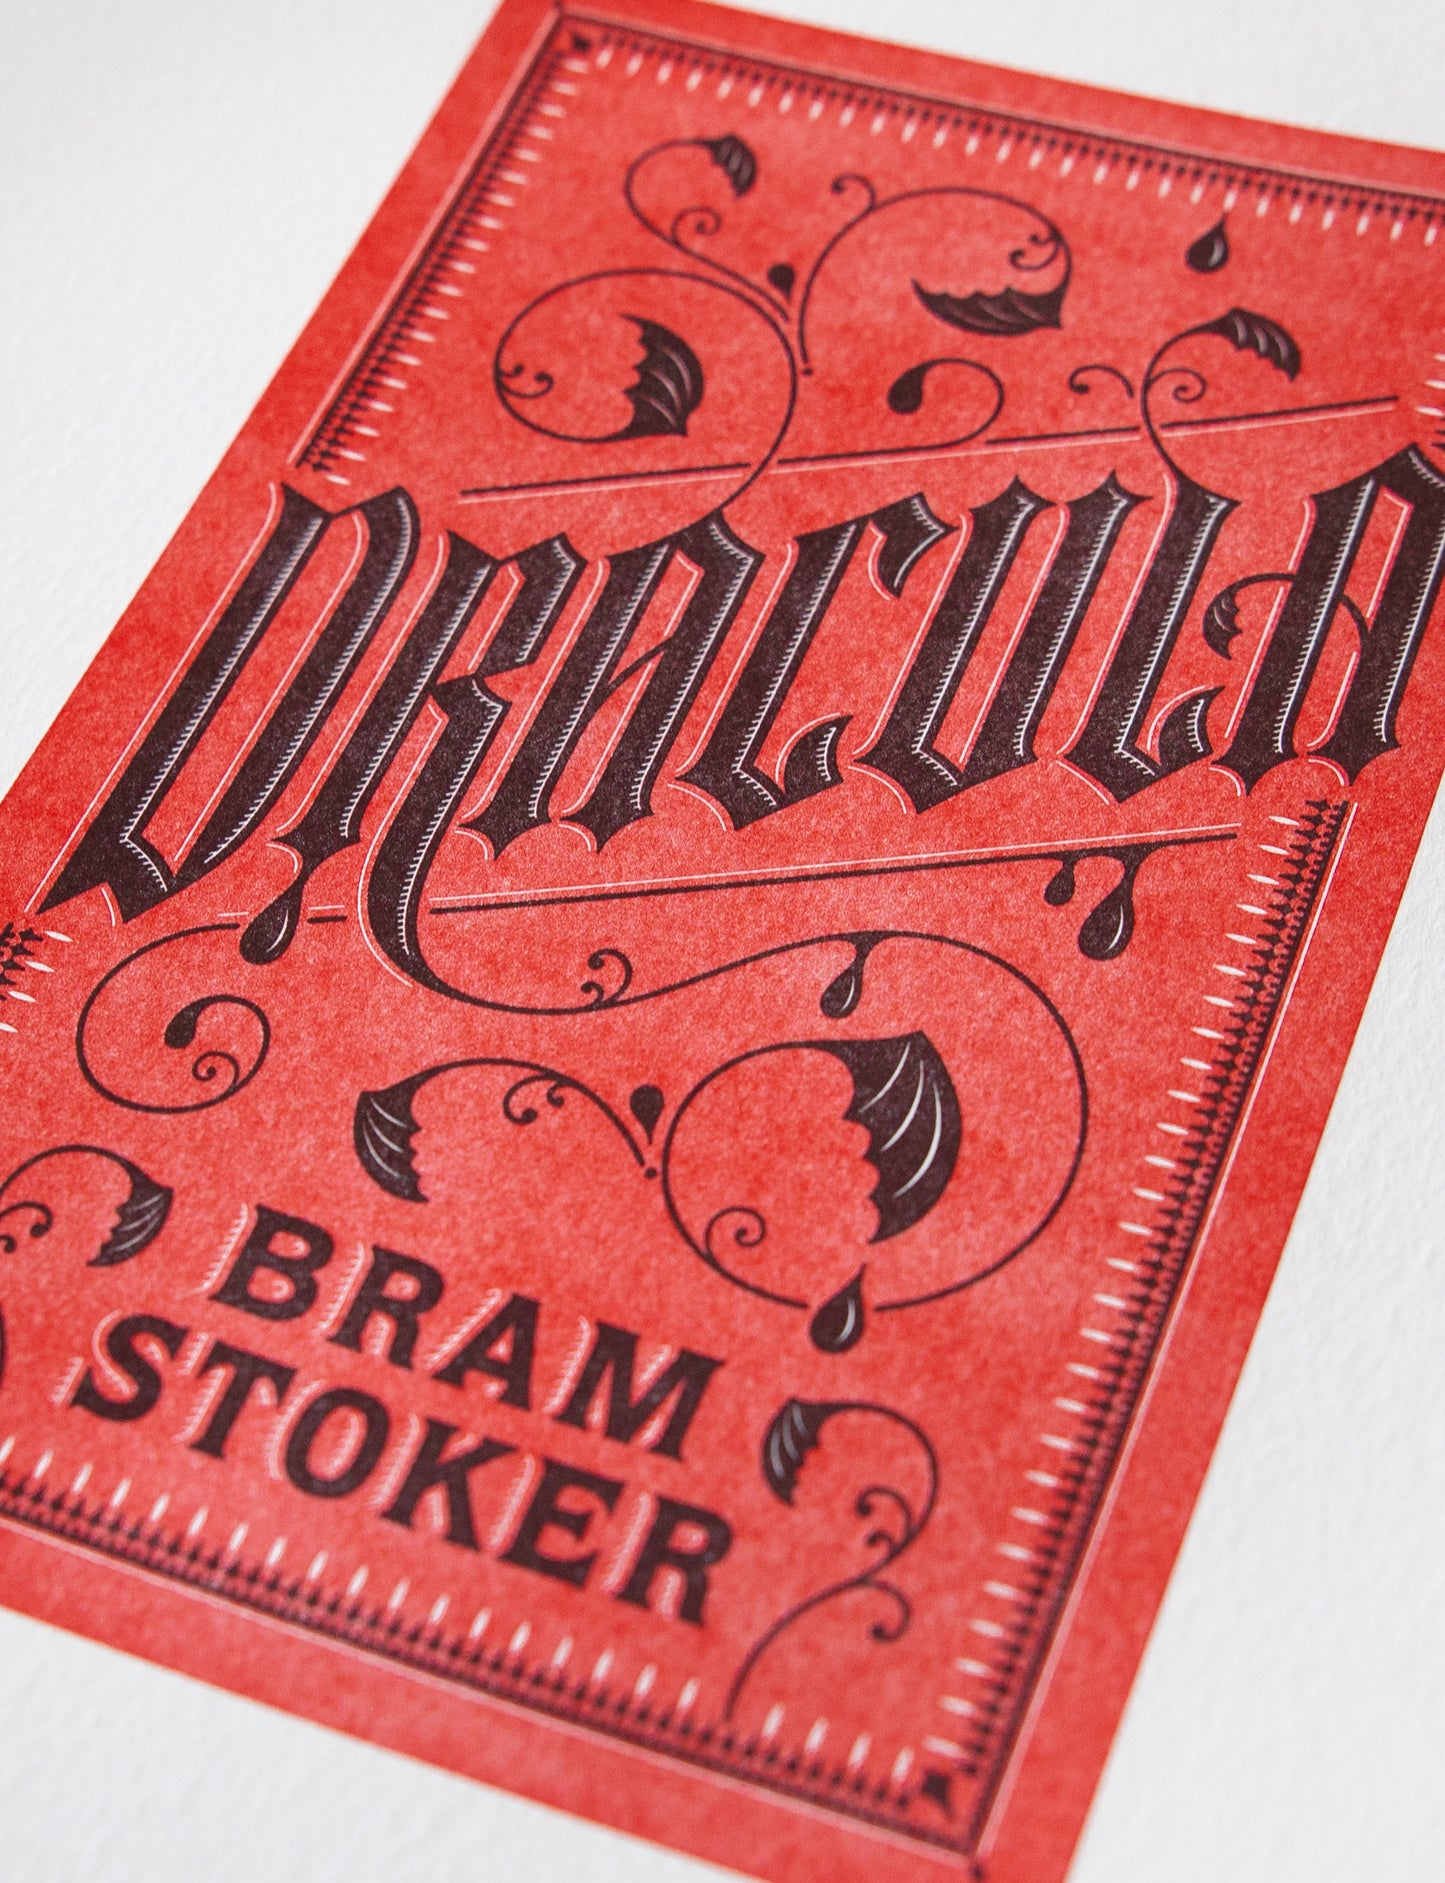 Close-up of a 2-color letterpress print in red and black. Printed artwork is an illustrated book cover of Dracula including custom hand lettering.